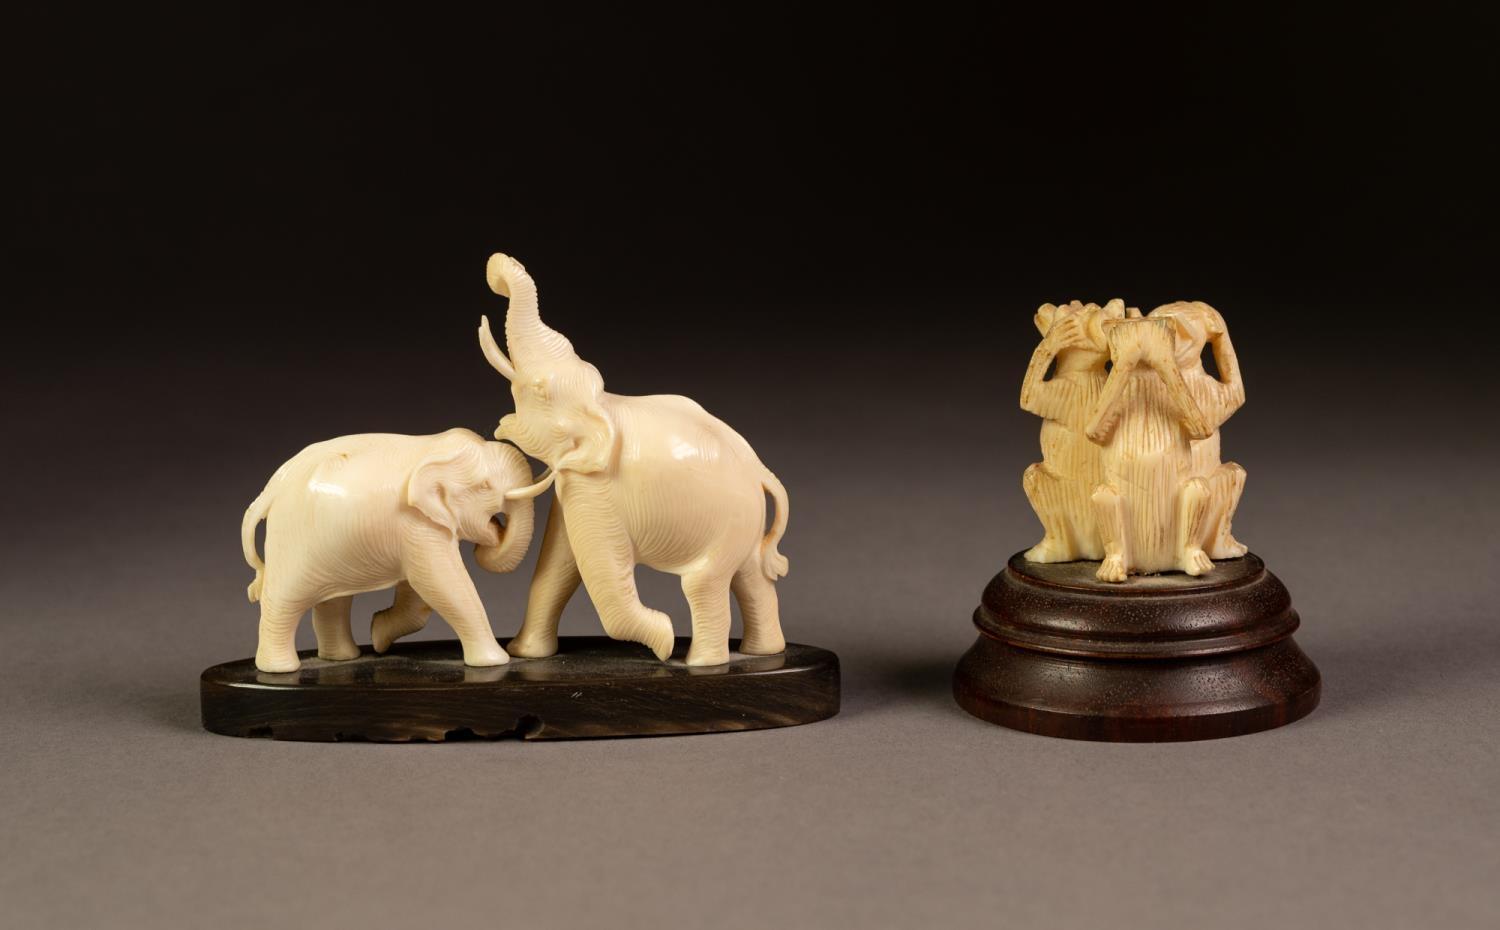 A SMALL CARVED IVORY MODEL OF TWO ELEPHANTS FIGHTING, on an elliptical horn base, 3 3/4" (9.5cm) - Image 2 of 3